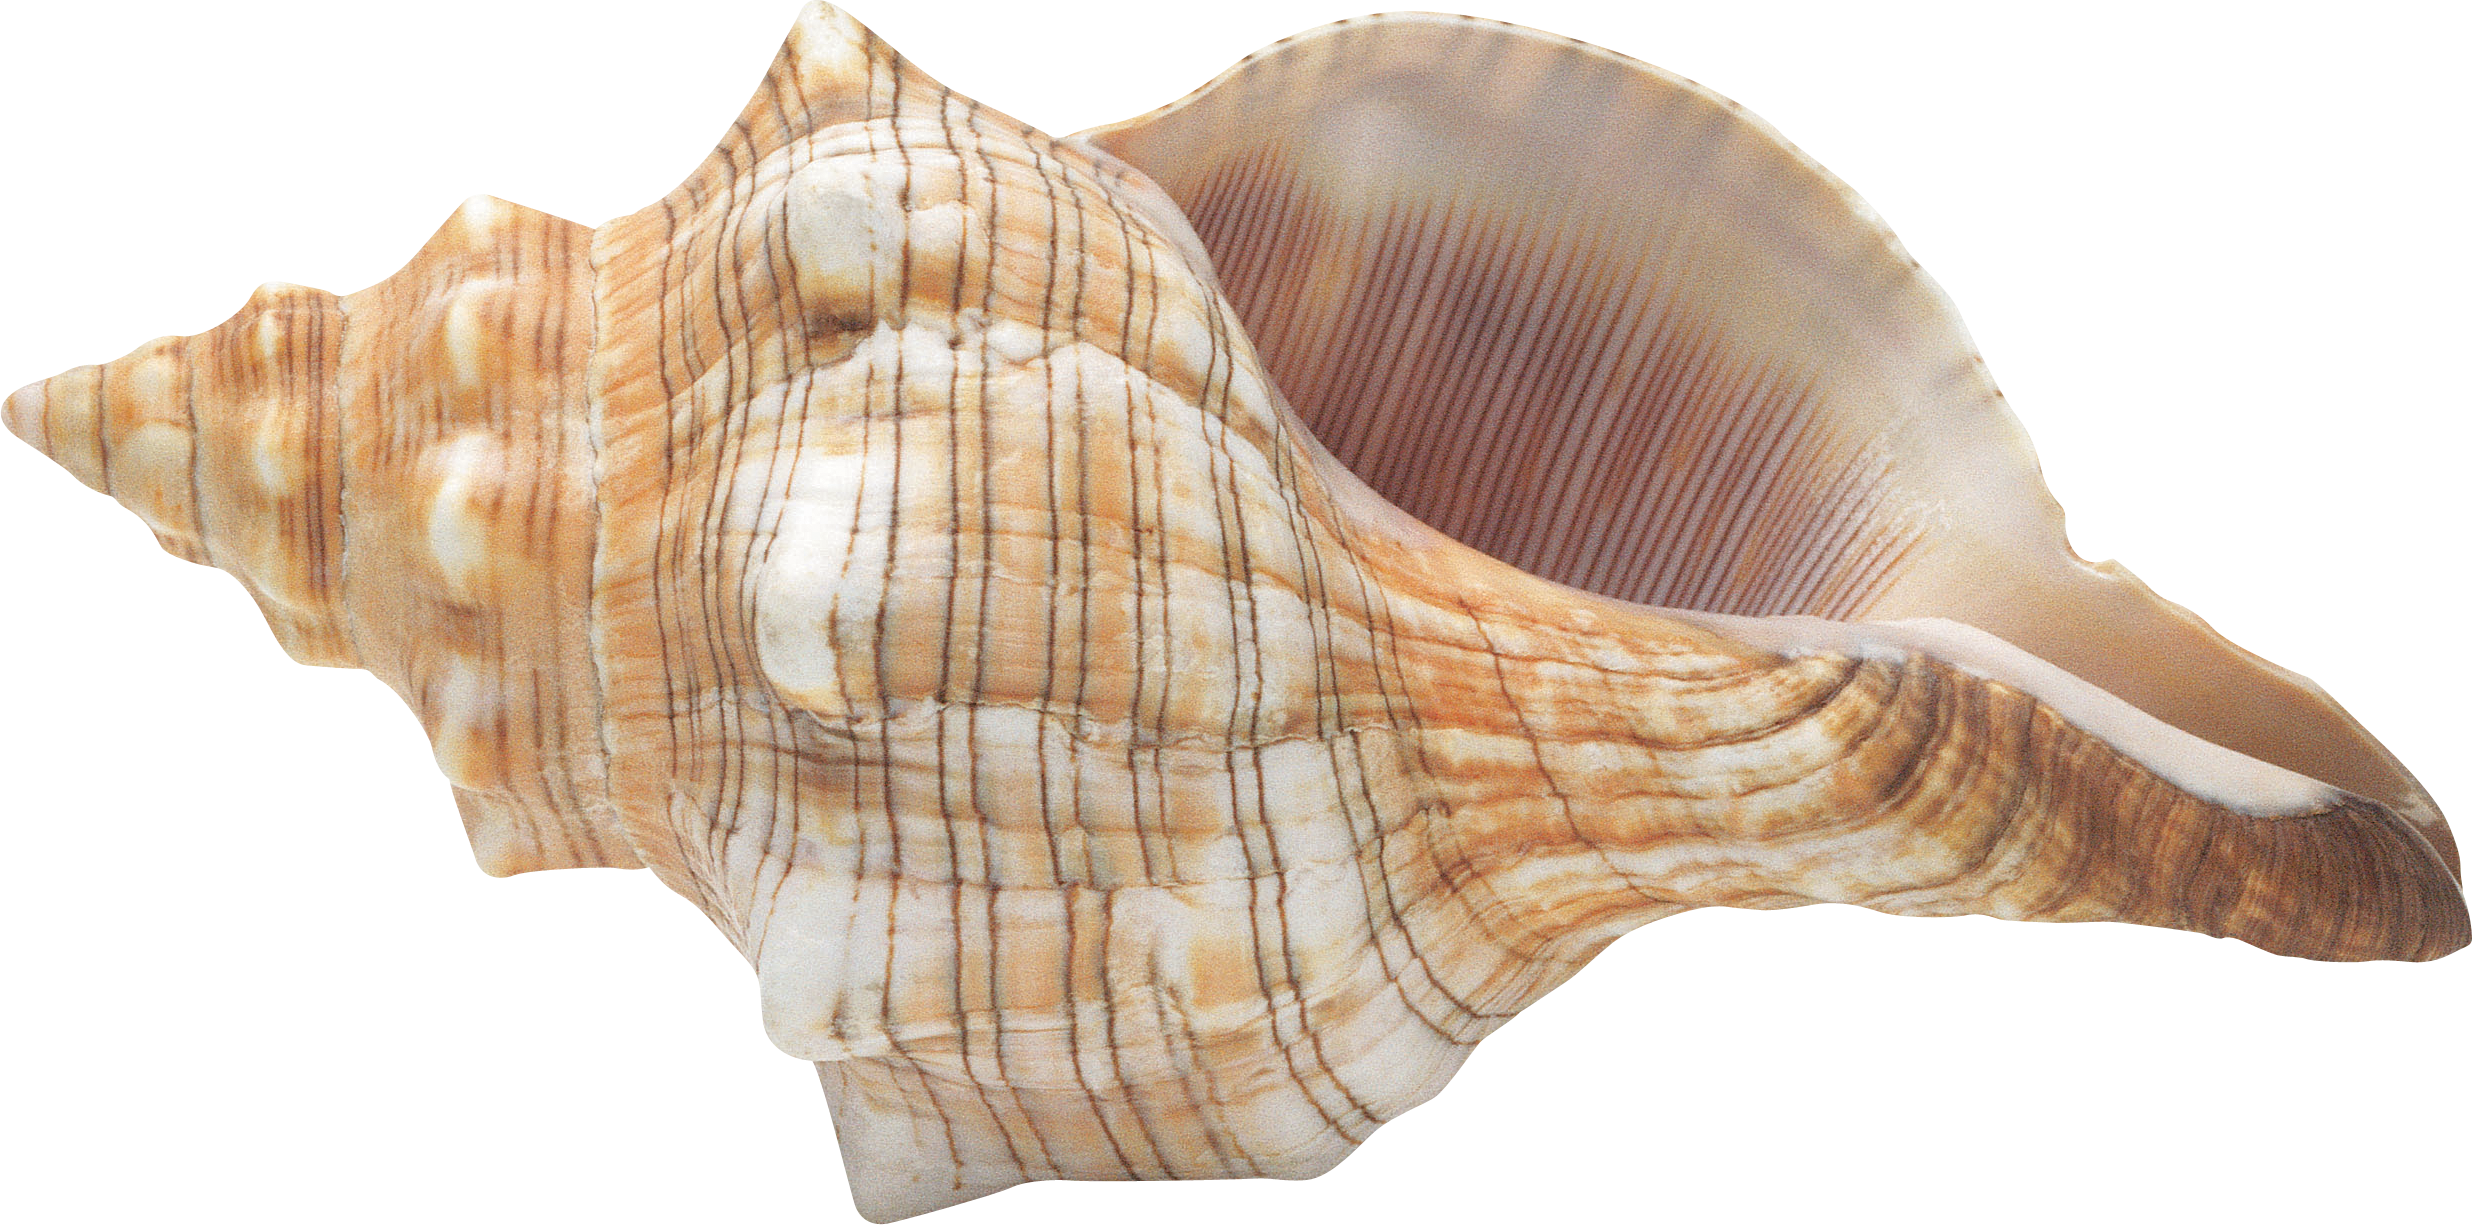 Seashell Conch PNG Image Background